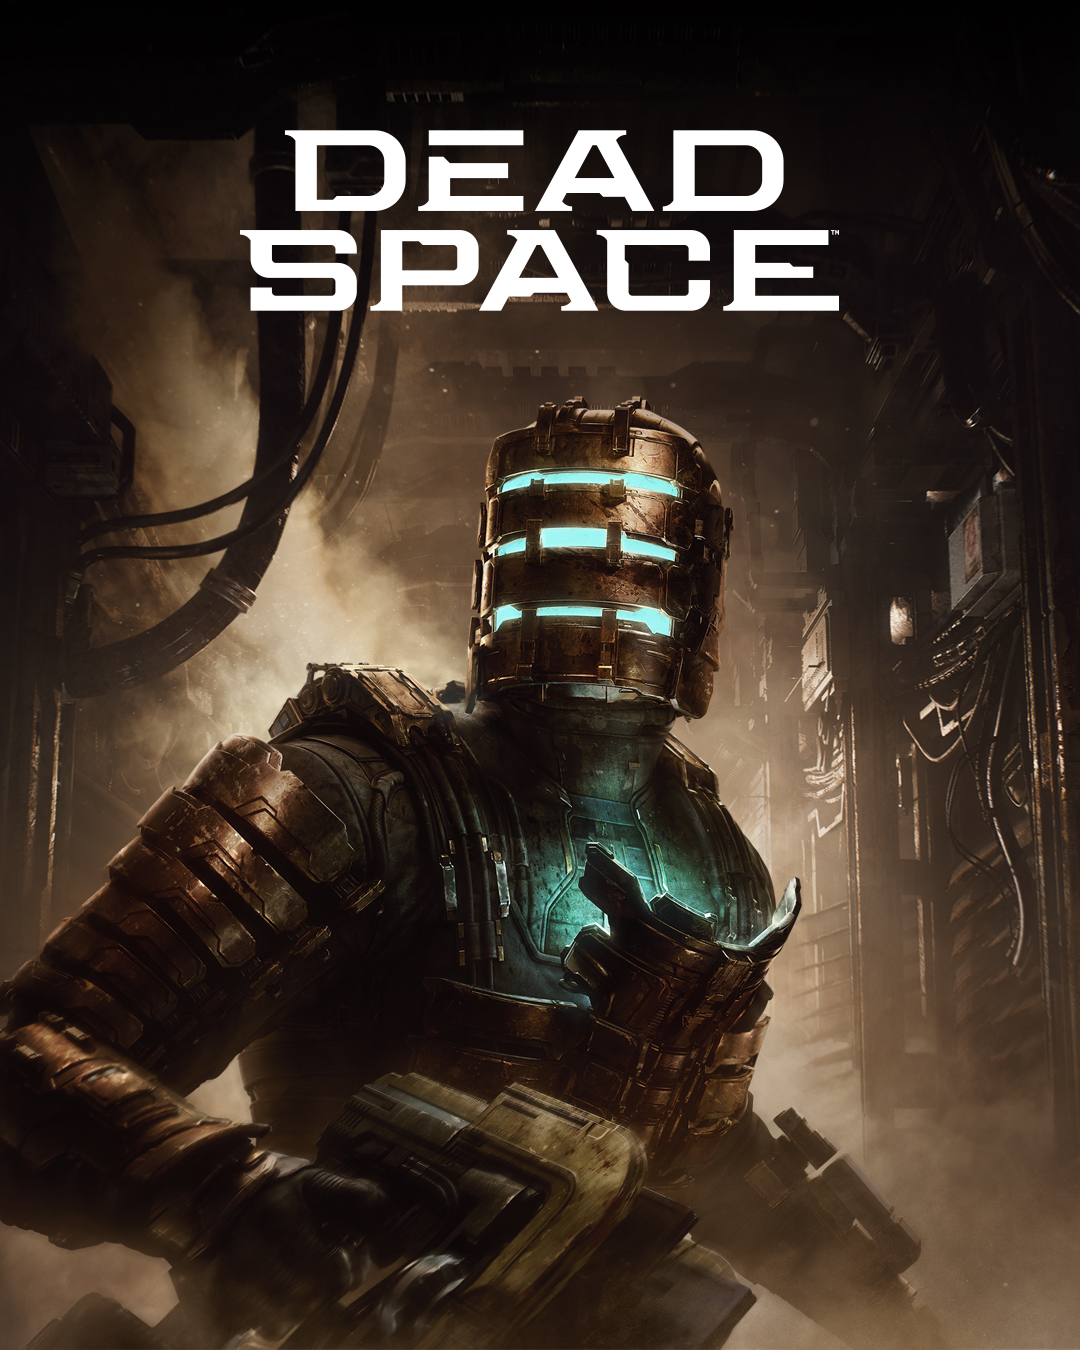 how many chapters in dead space?